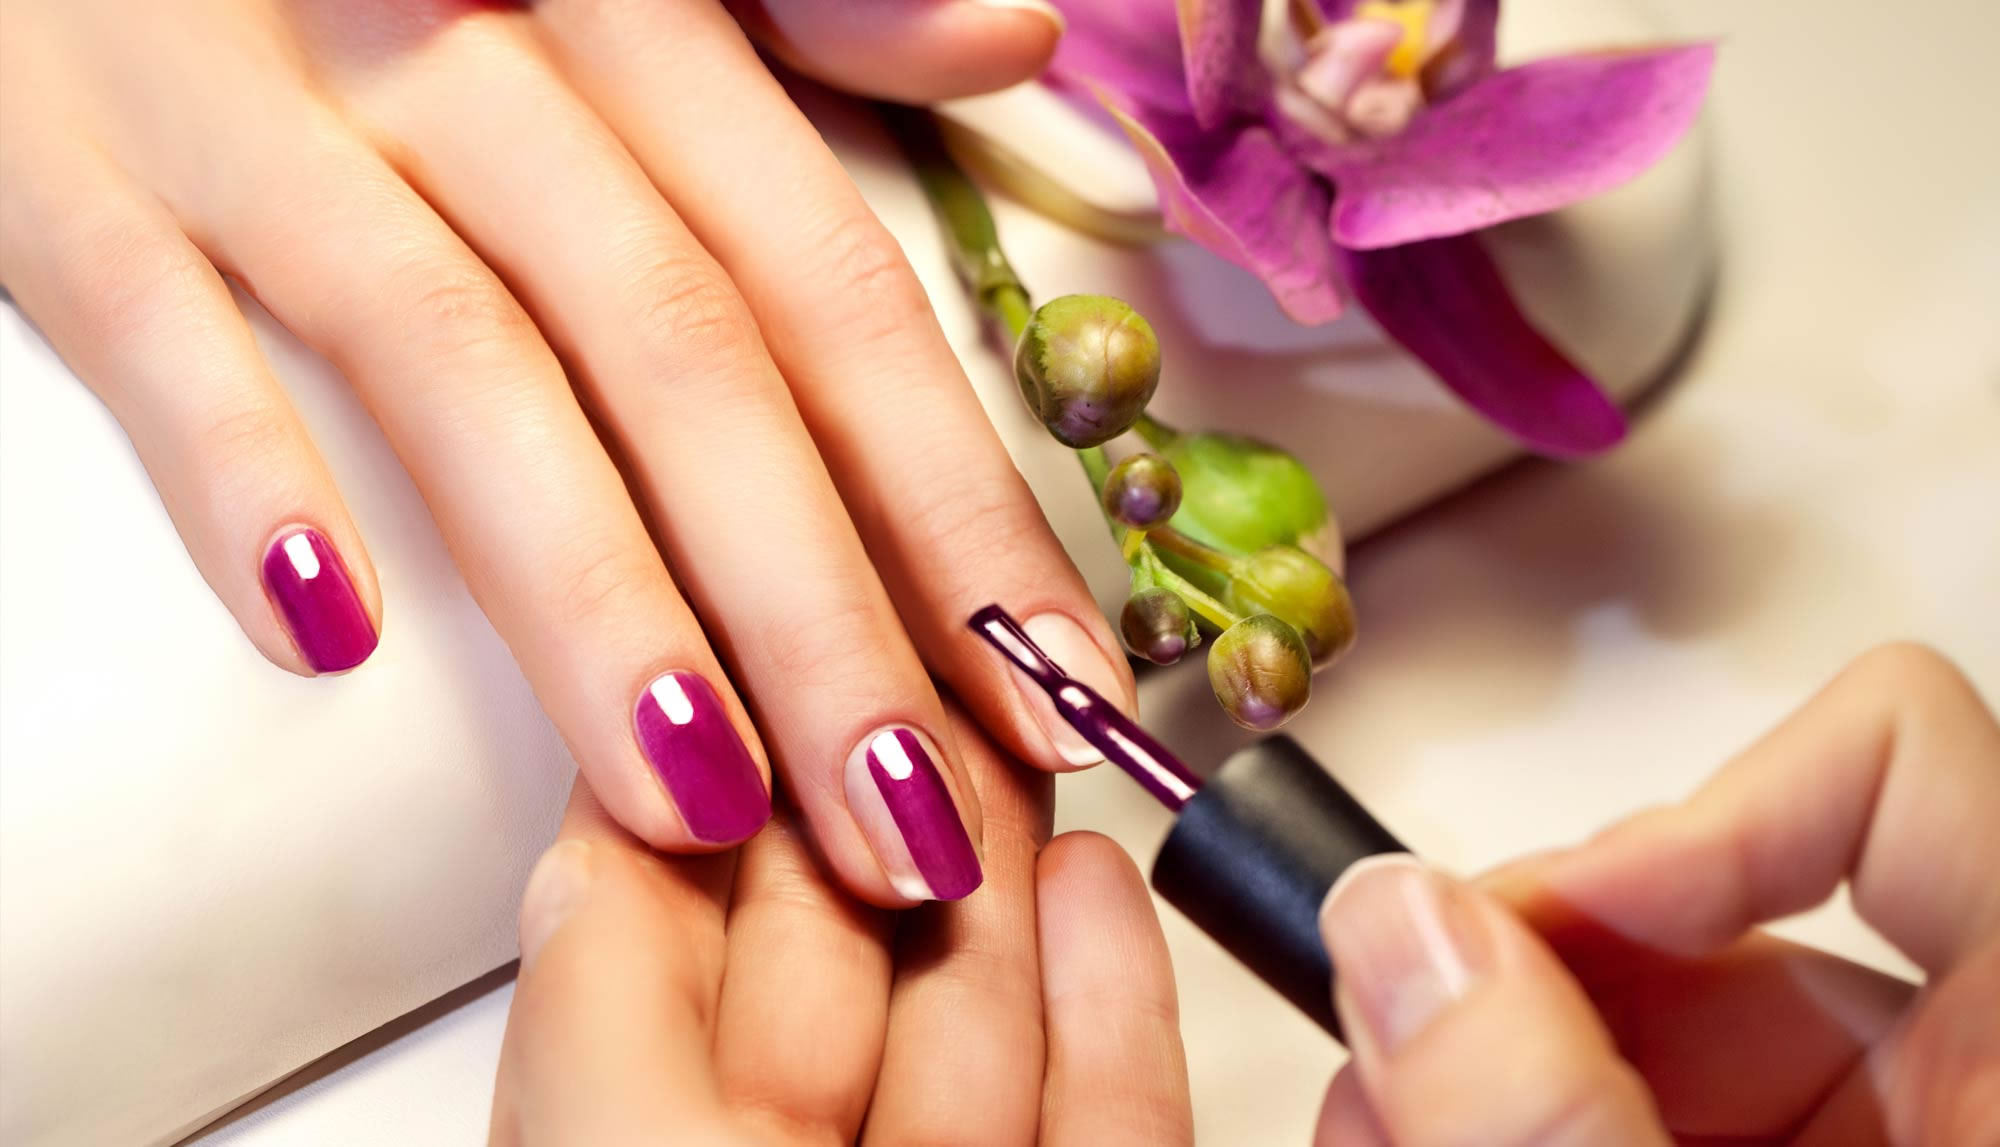 5. Step-by-Step Nail Design Tutorials for At-Home Manicures - wide 9